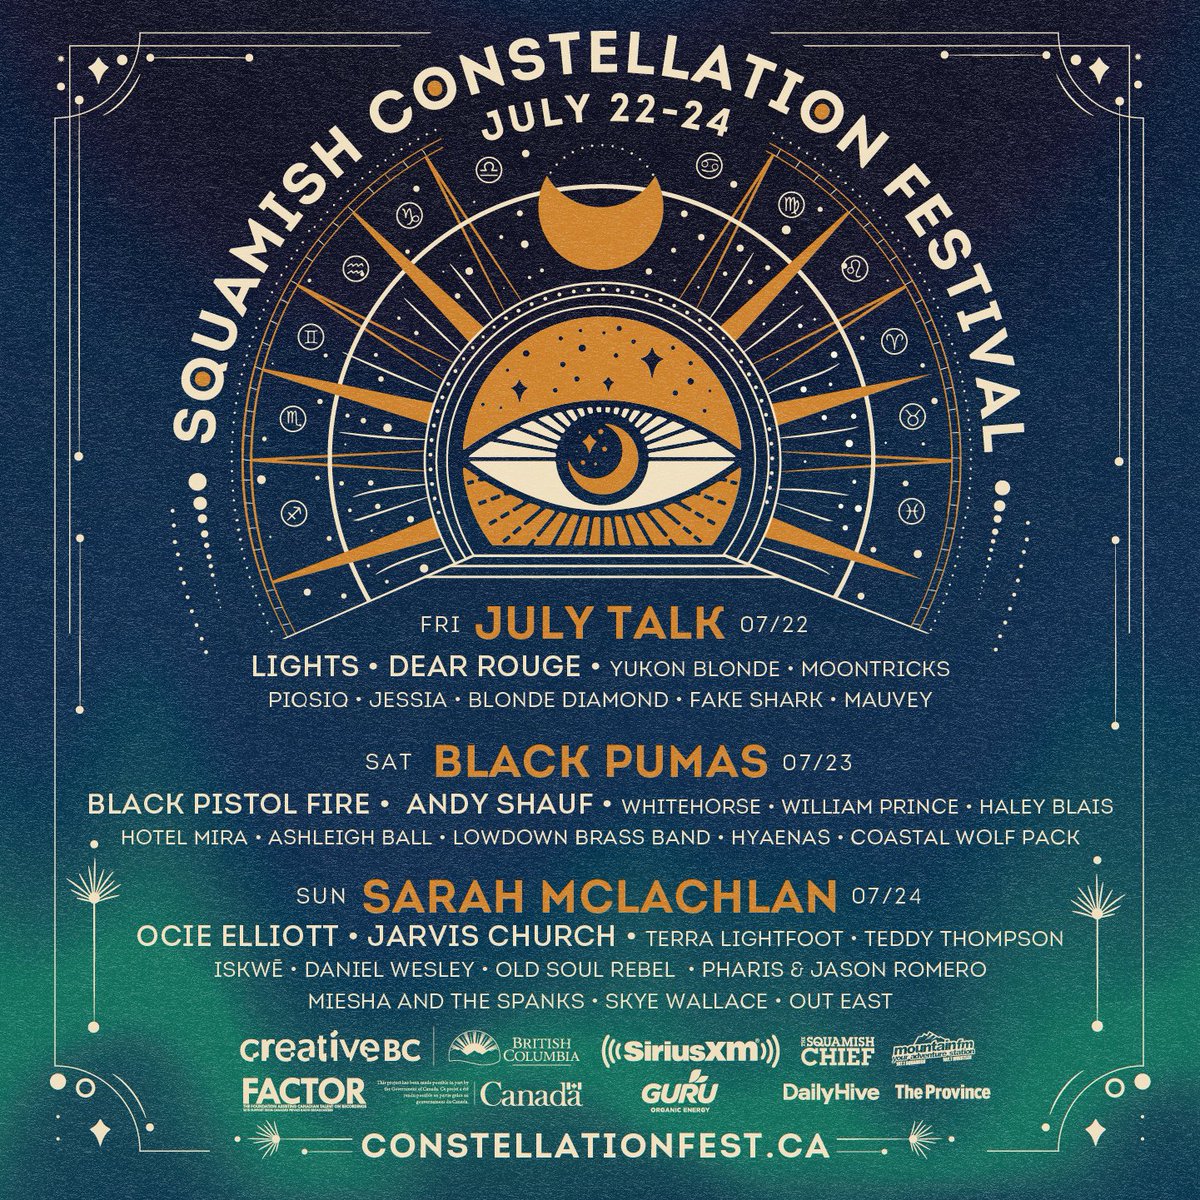 Looking forward to getting back to live shows and excited about performing at the @SqConstellation on July 24th. Presale tickets are available now until 10pm tomorrow with presale code STARSARAH. More information is available at contellationfest.ca XoS